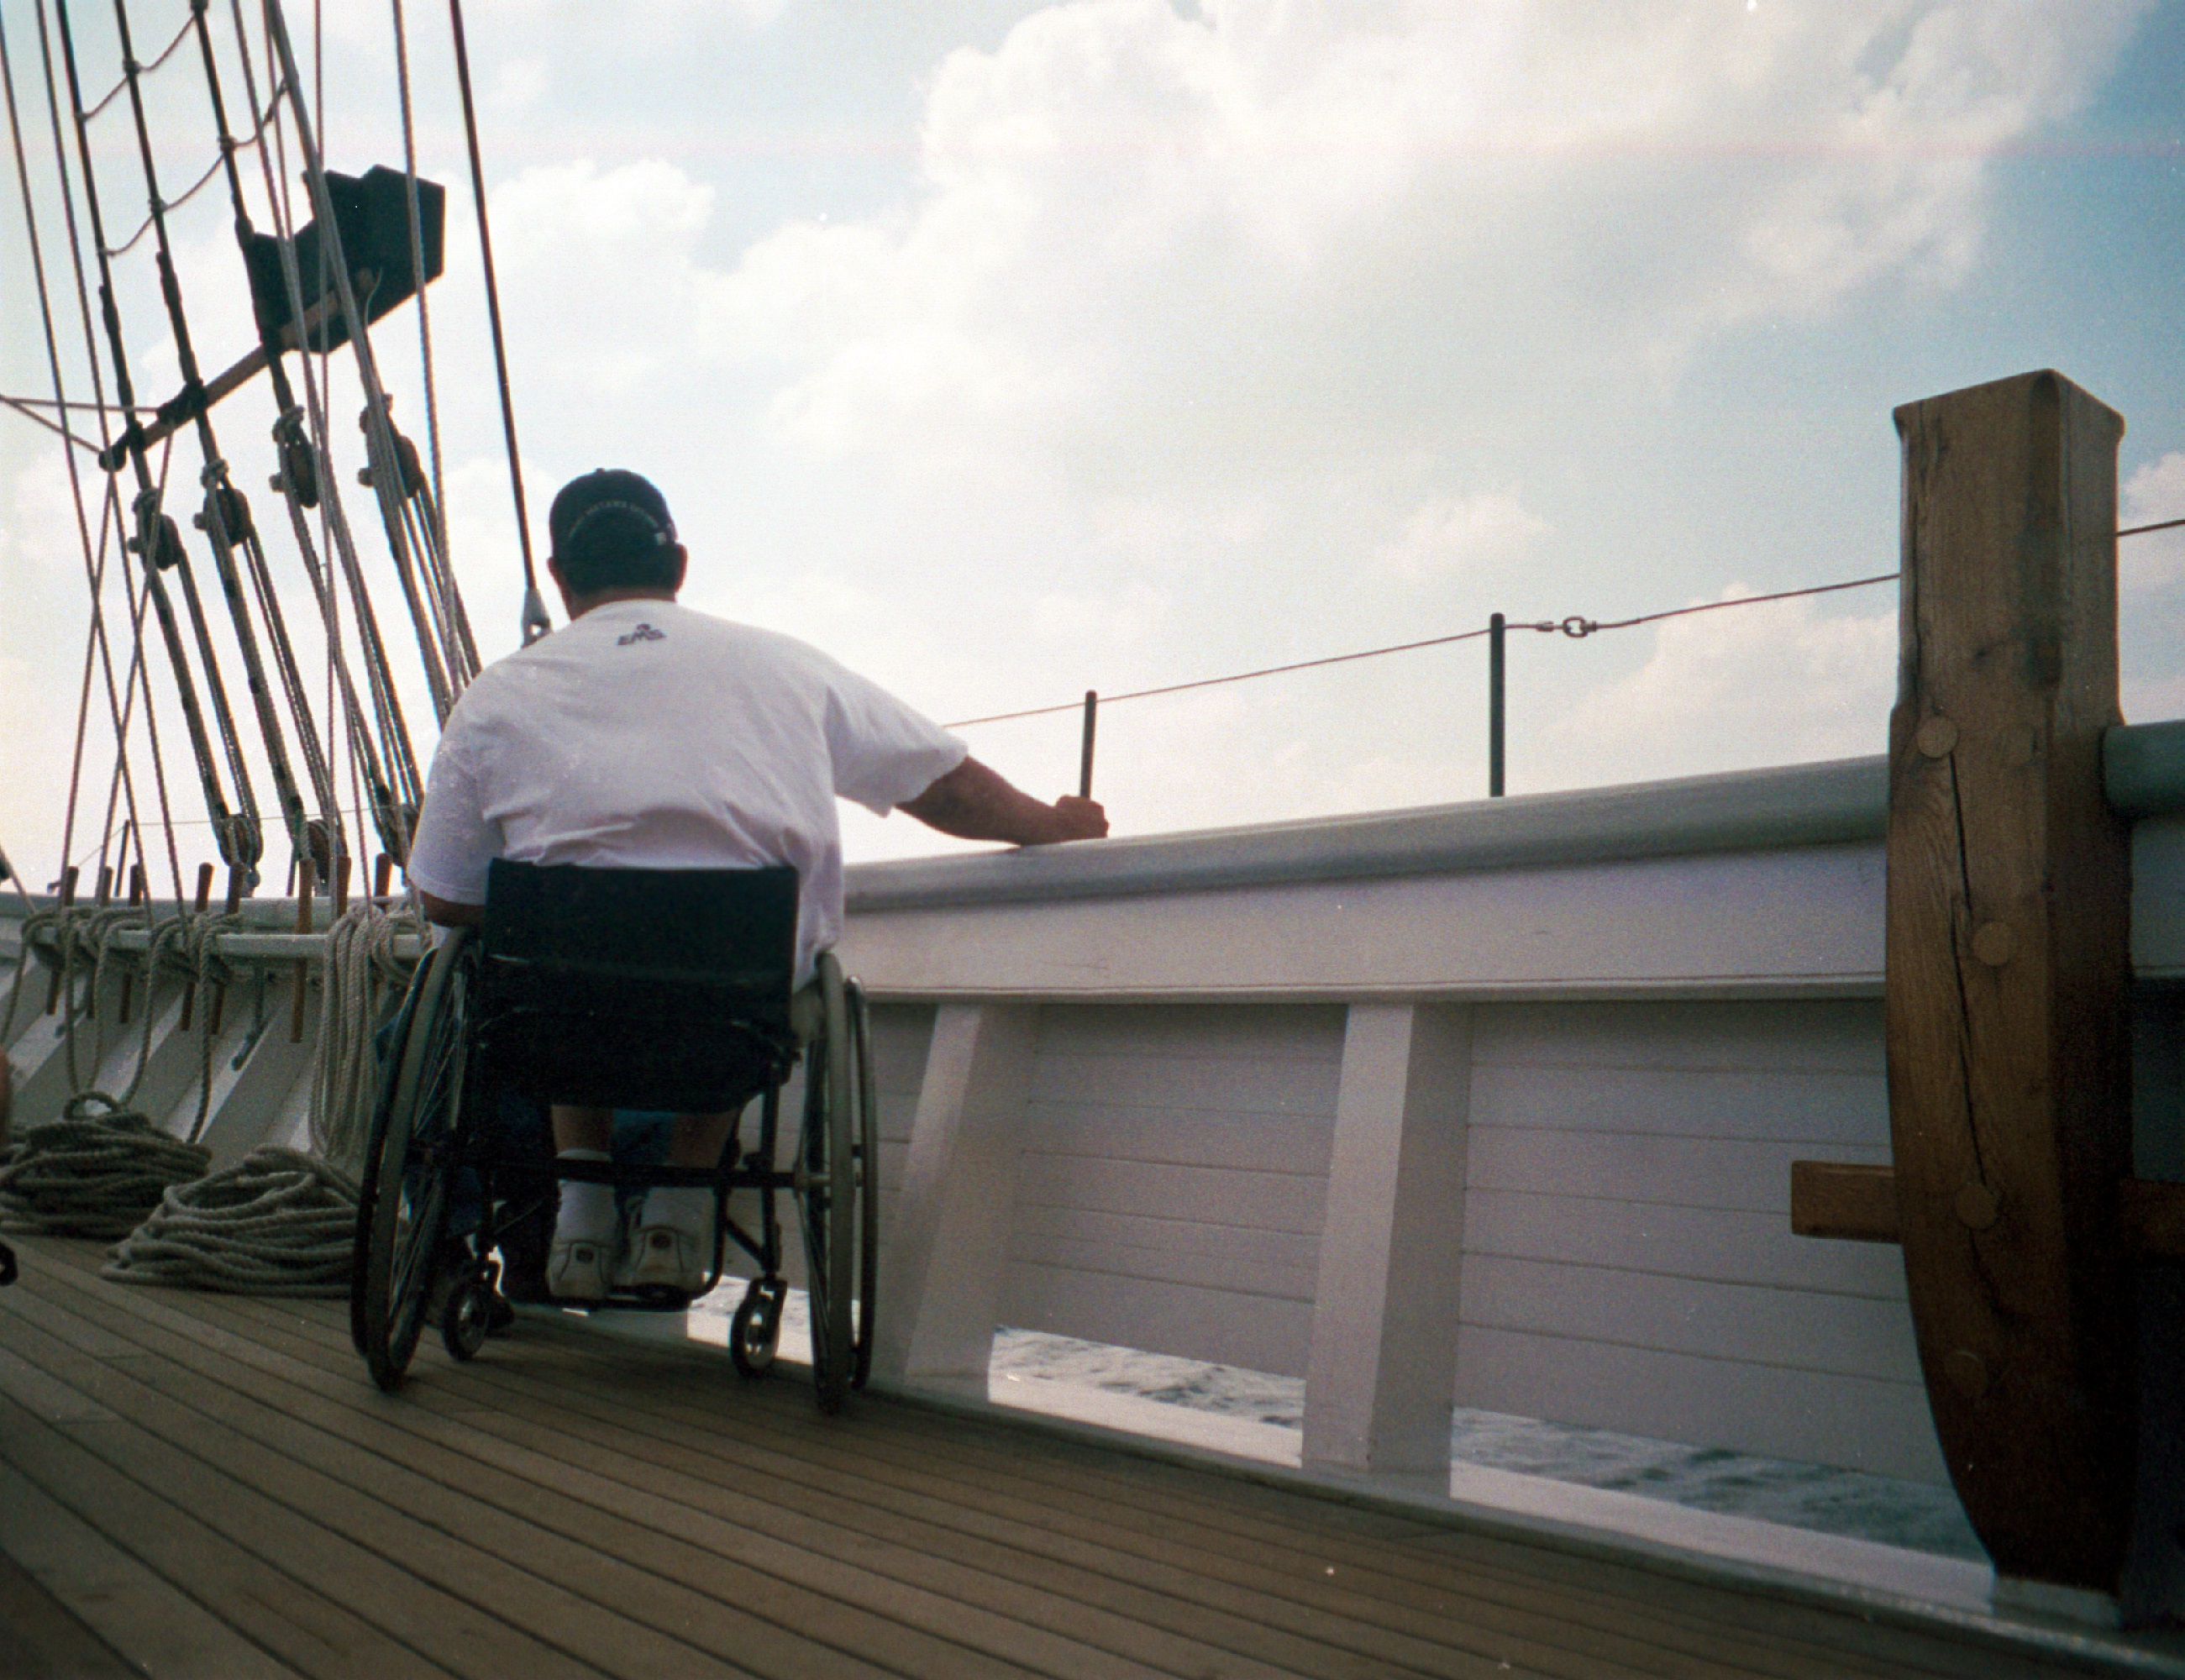 Person in a wheel chair holding on to the bow of a sailing vessel looking out